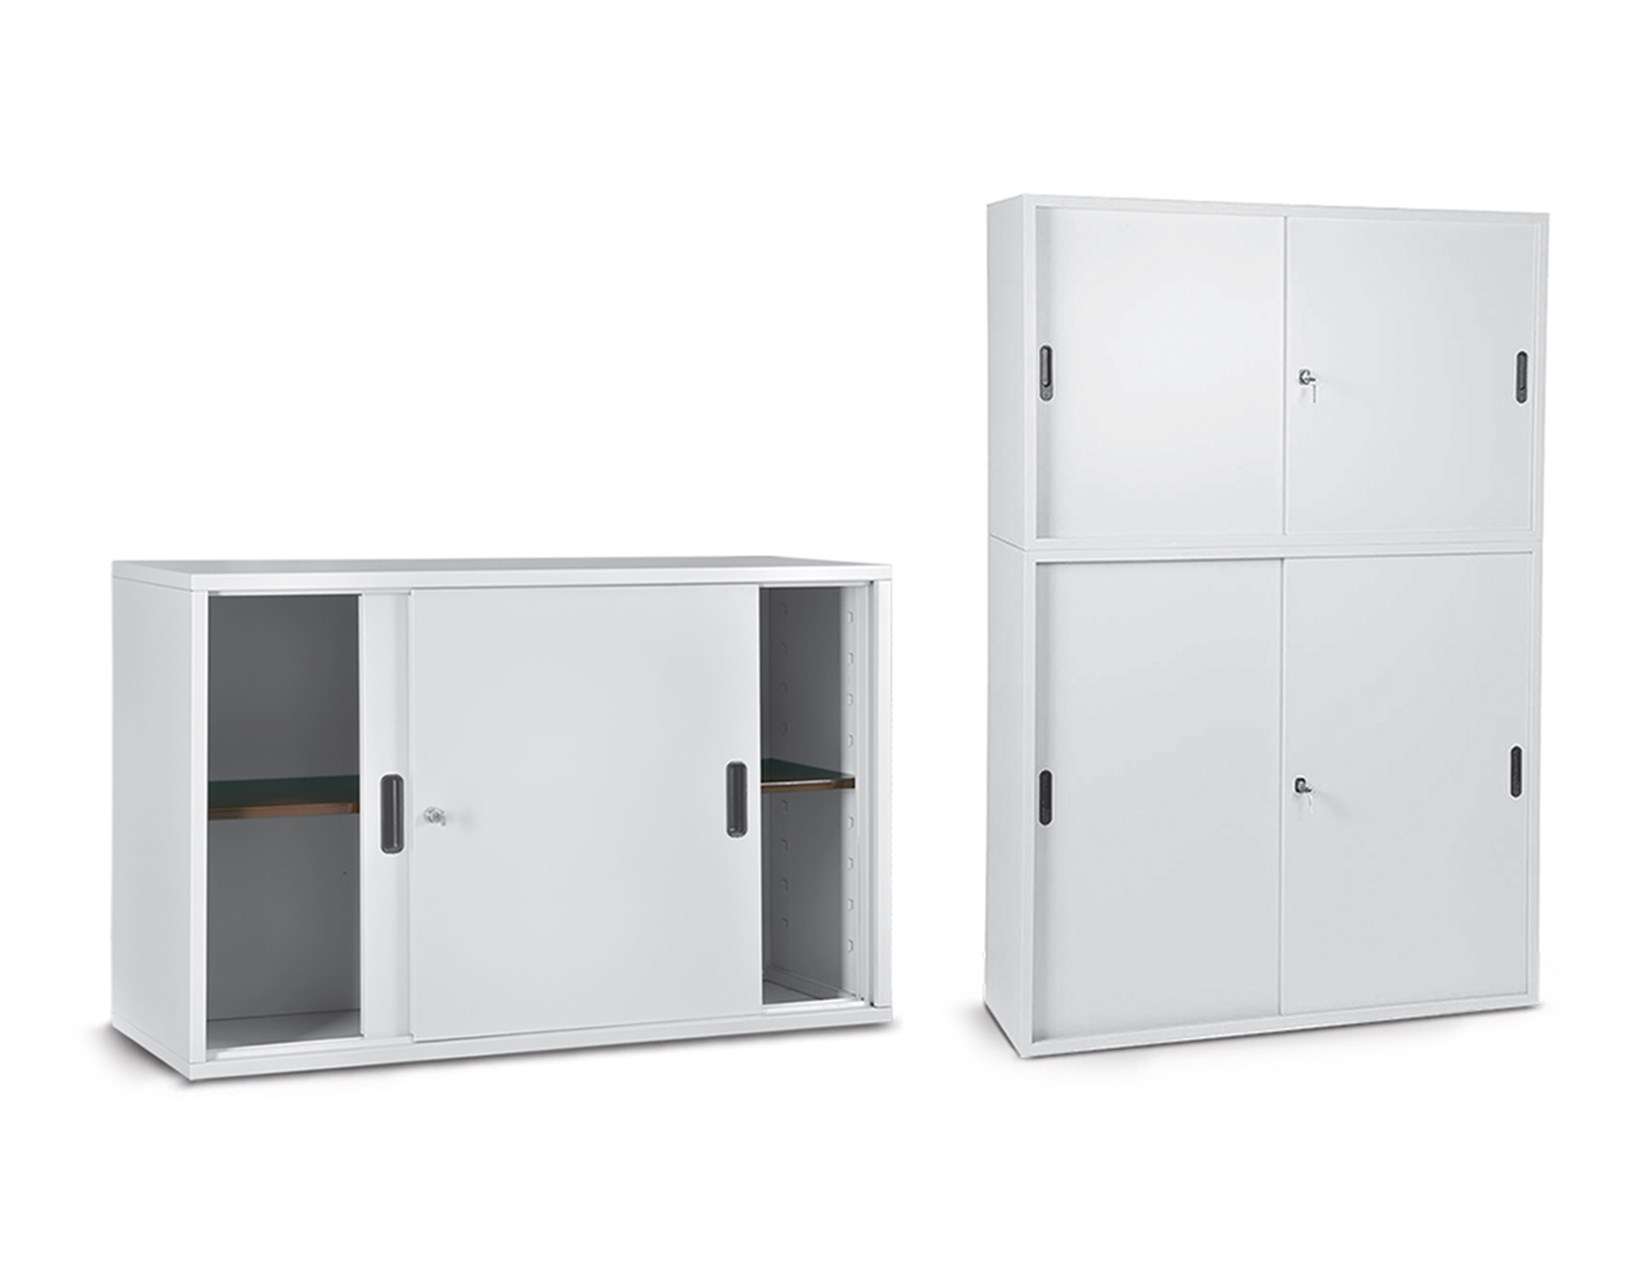 Archive cabinets with sliding doors